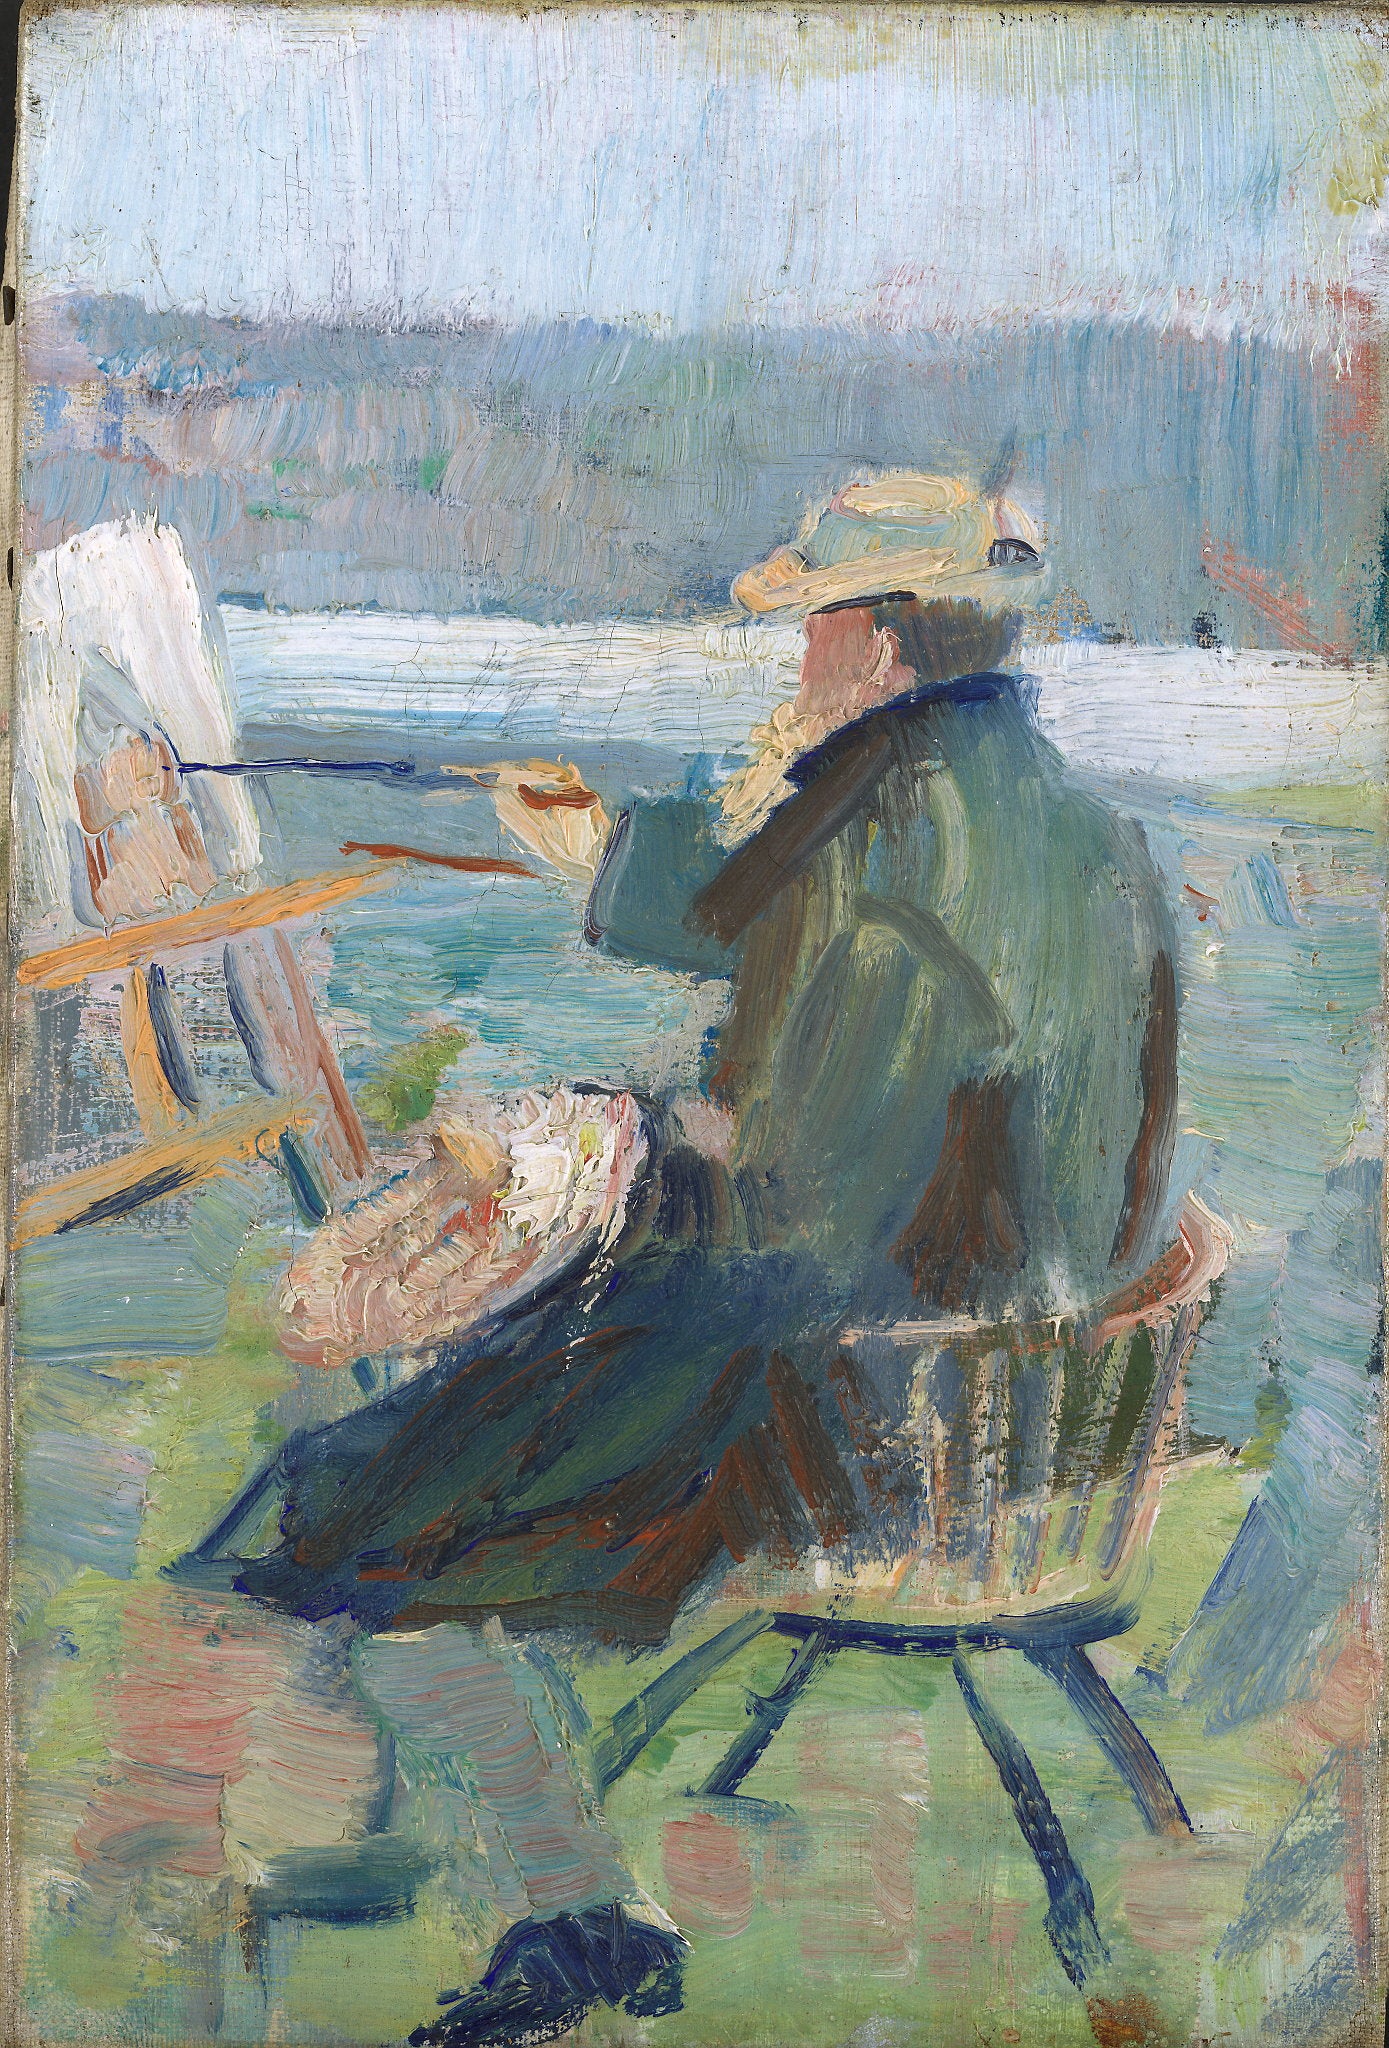 Christian at the easel